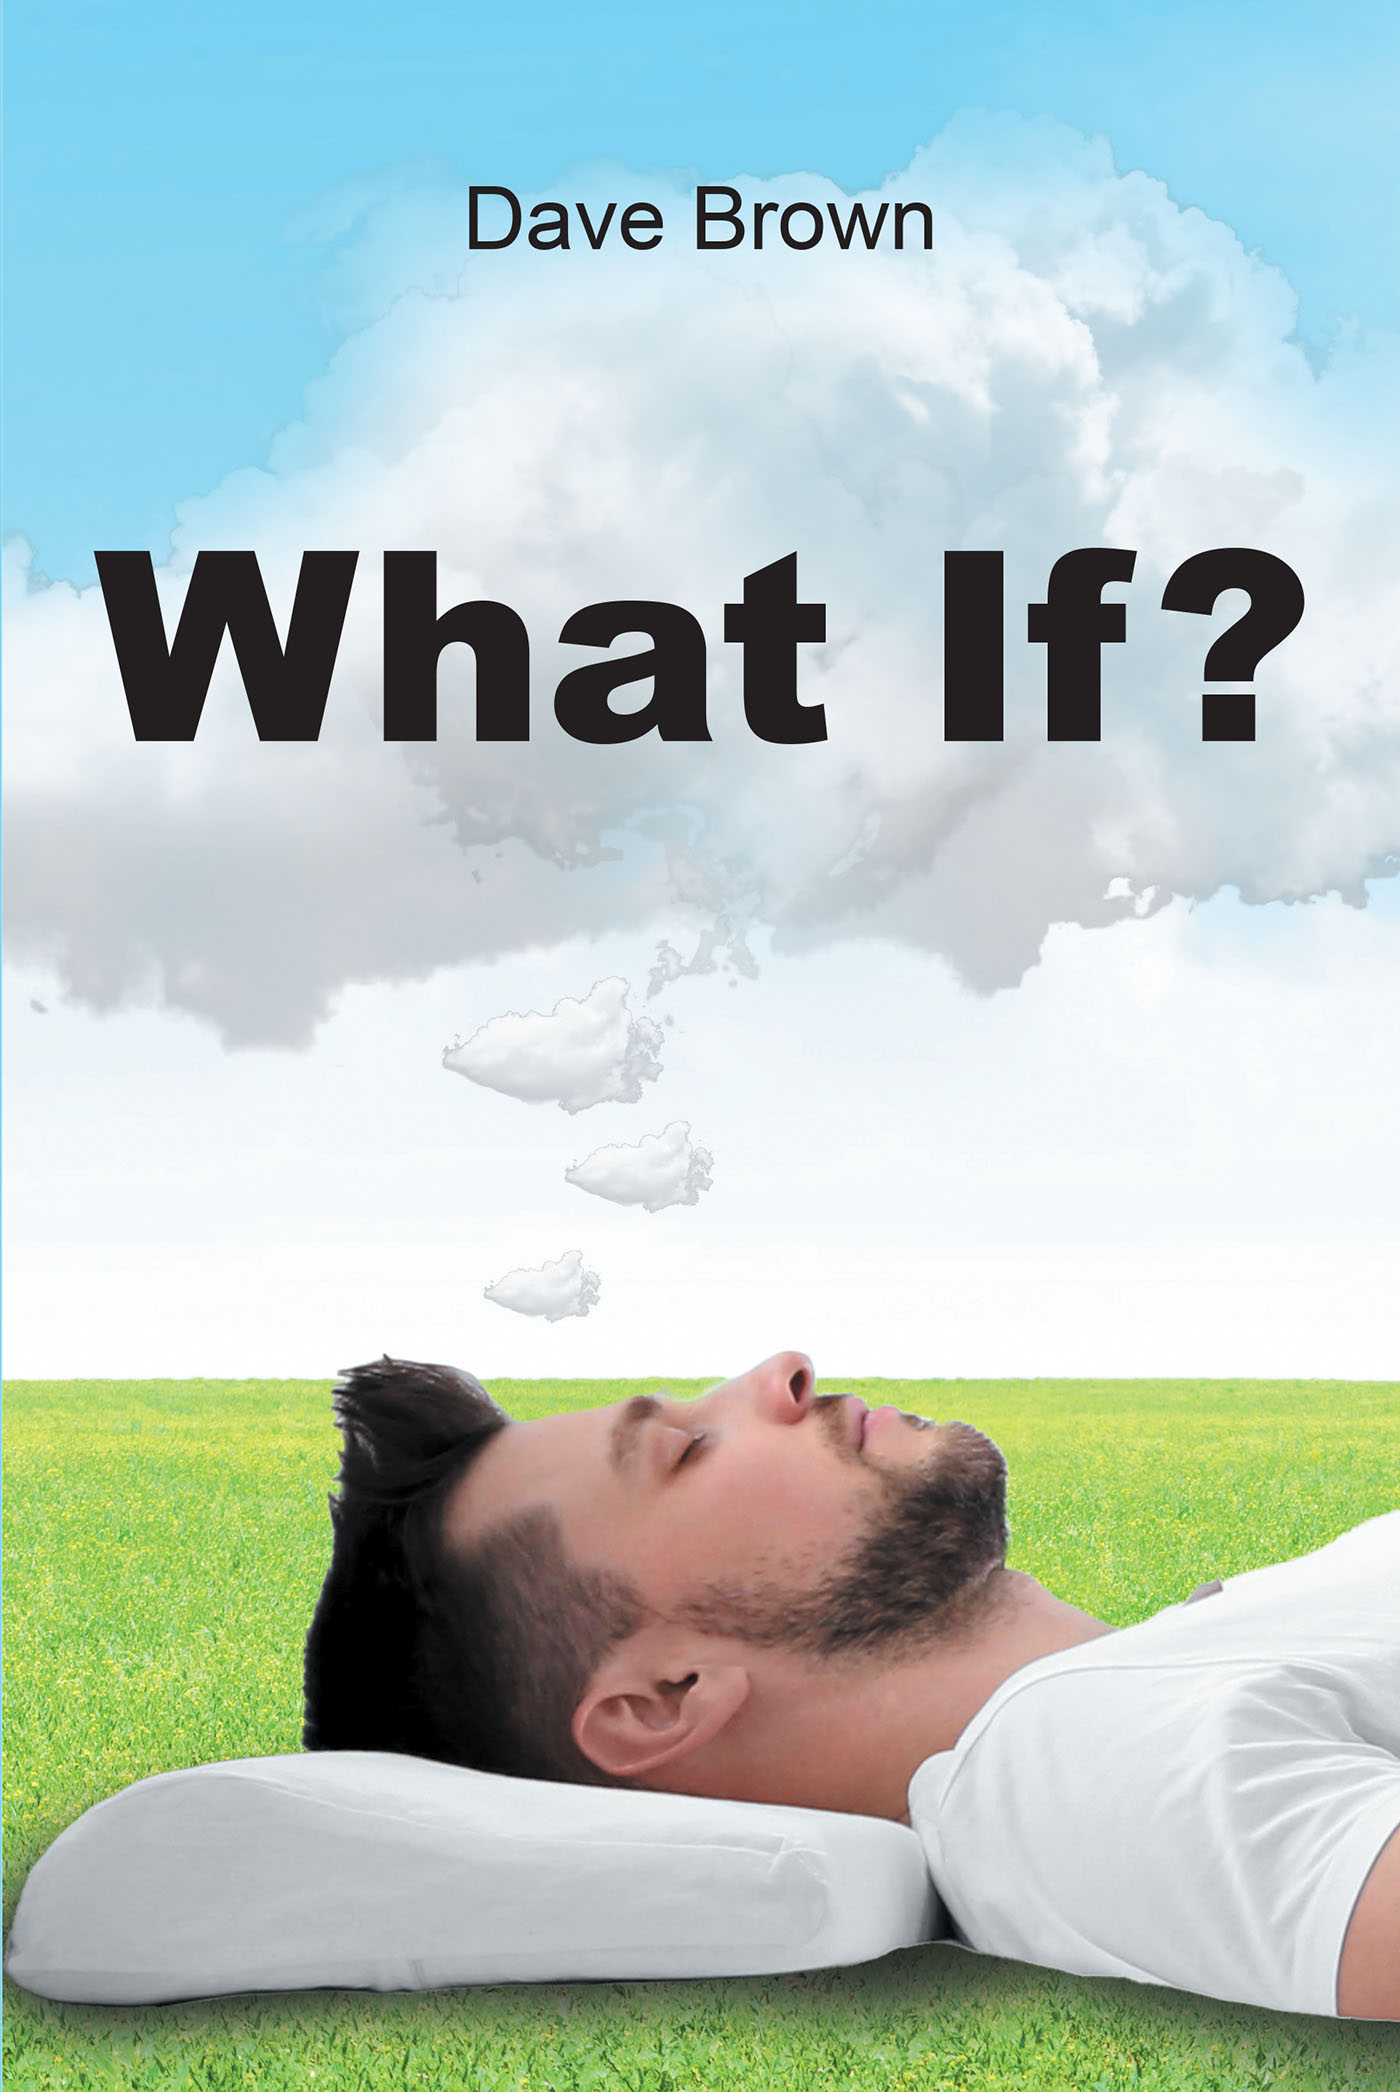 Author David Brown’s New Book, "What if?" is a Fascinating Tale That Follows the Adventures of a Man Who is Granted an Incredible Ability to Bend Reality to His Will